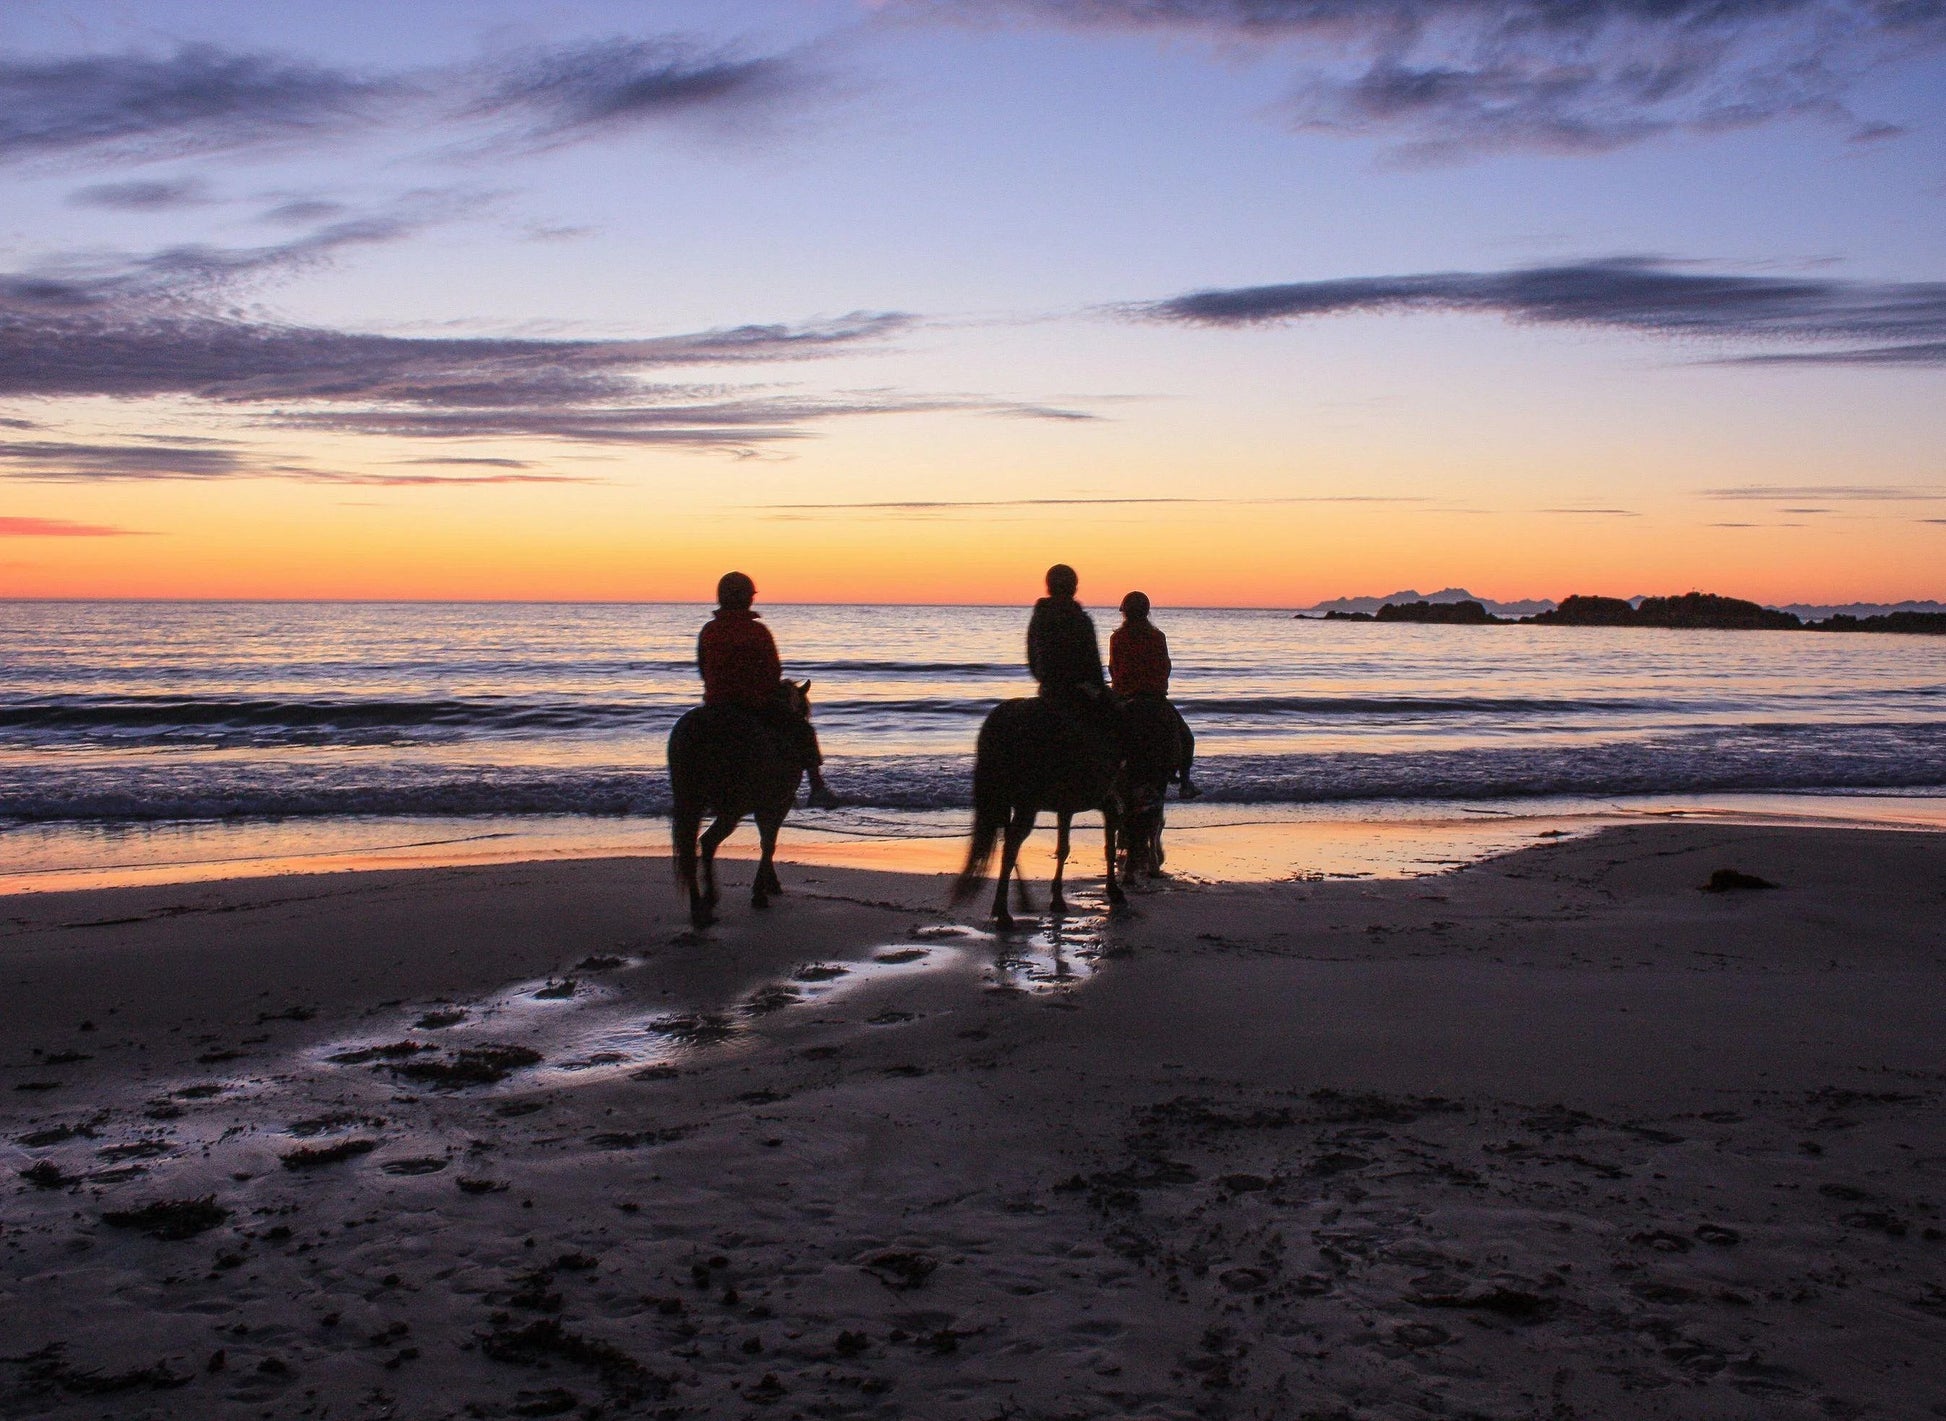 Three small group trip participants riding horses along the beach at sunset in Lofoten Norway.